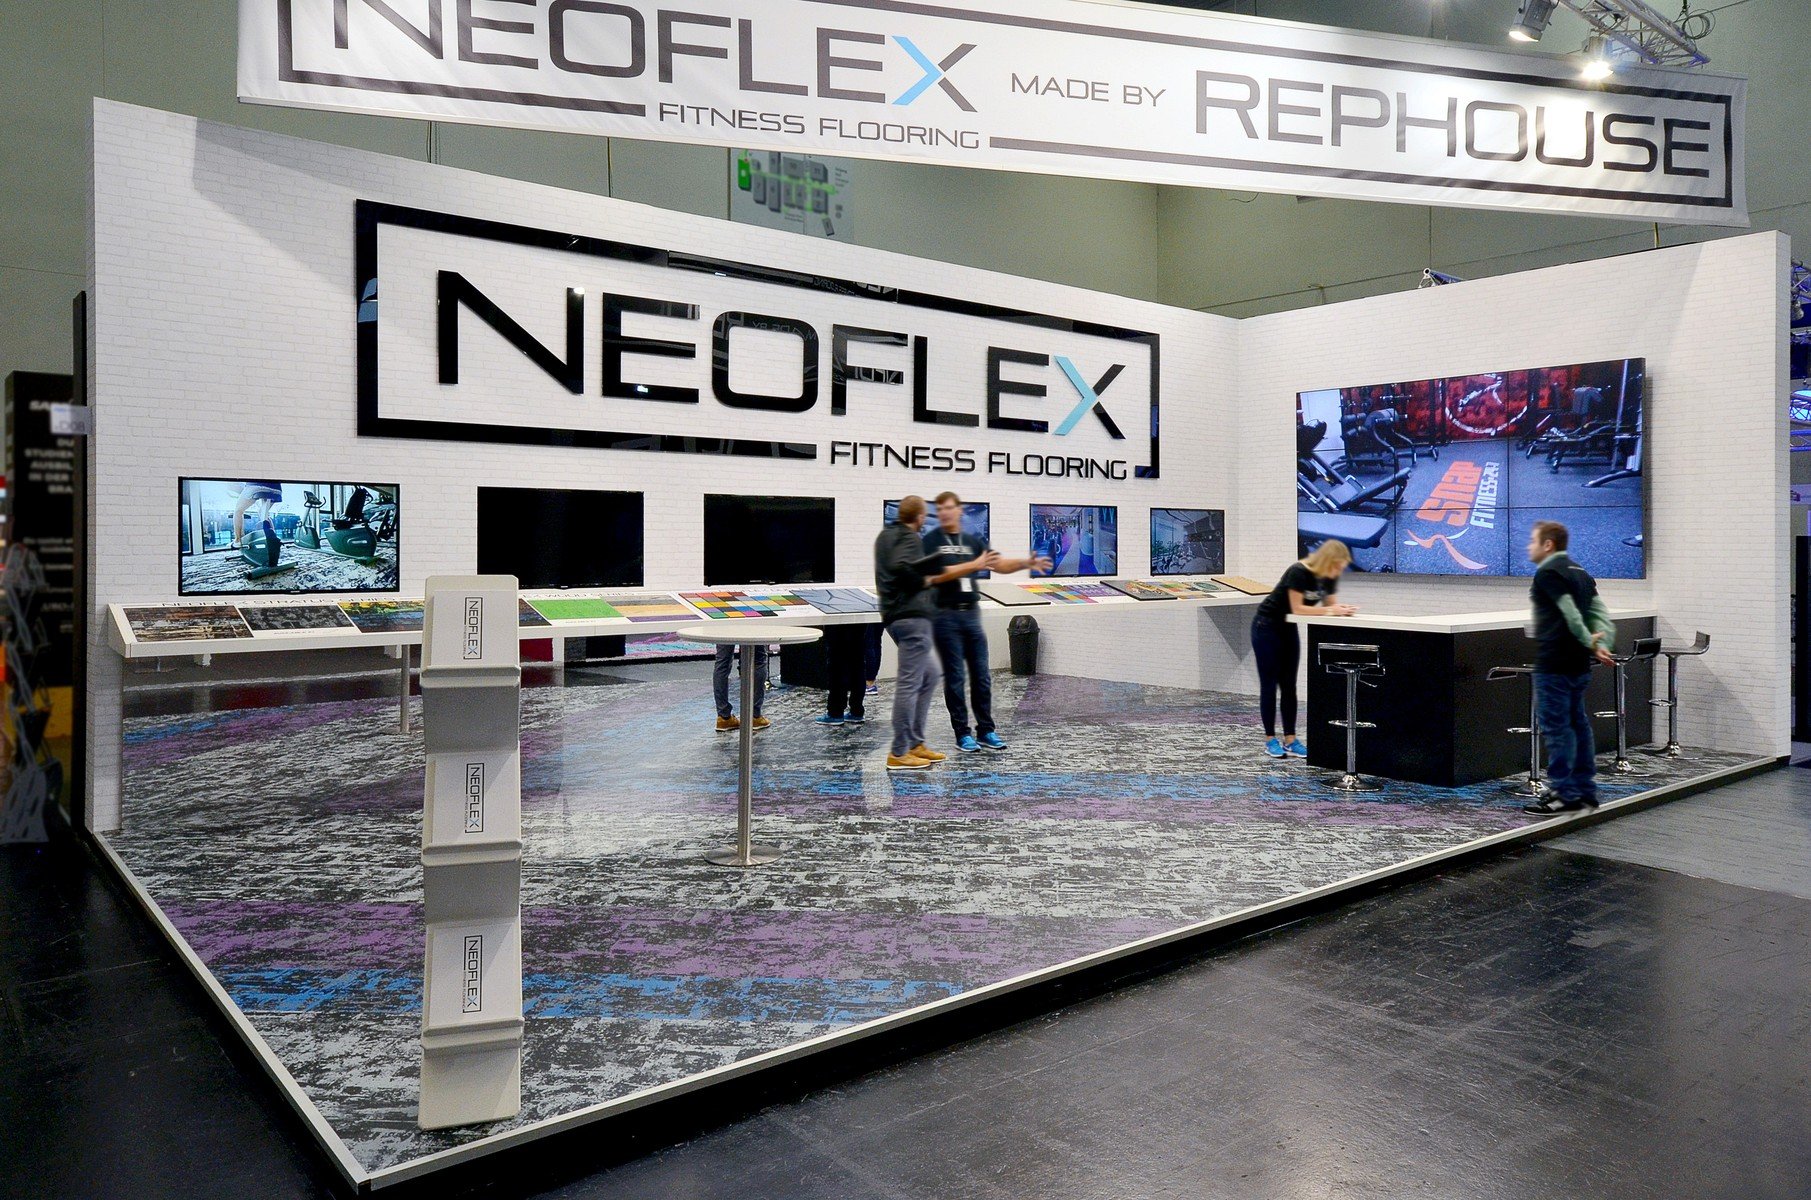 Rephouse Neoflex Fitness Floring Messestand Fibo 2018 4